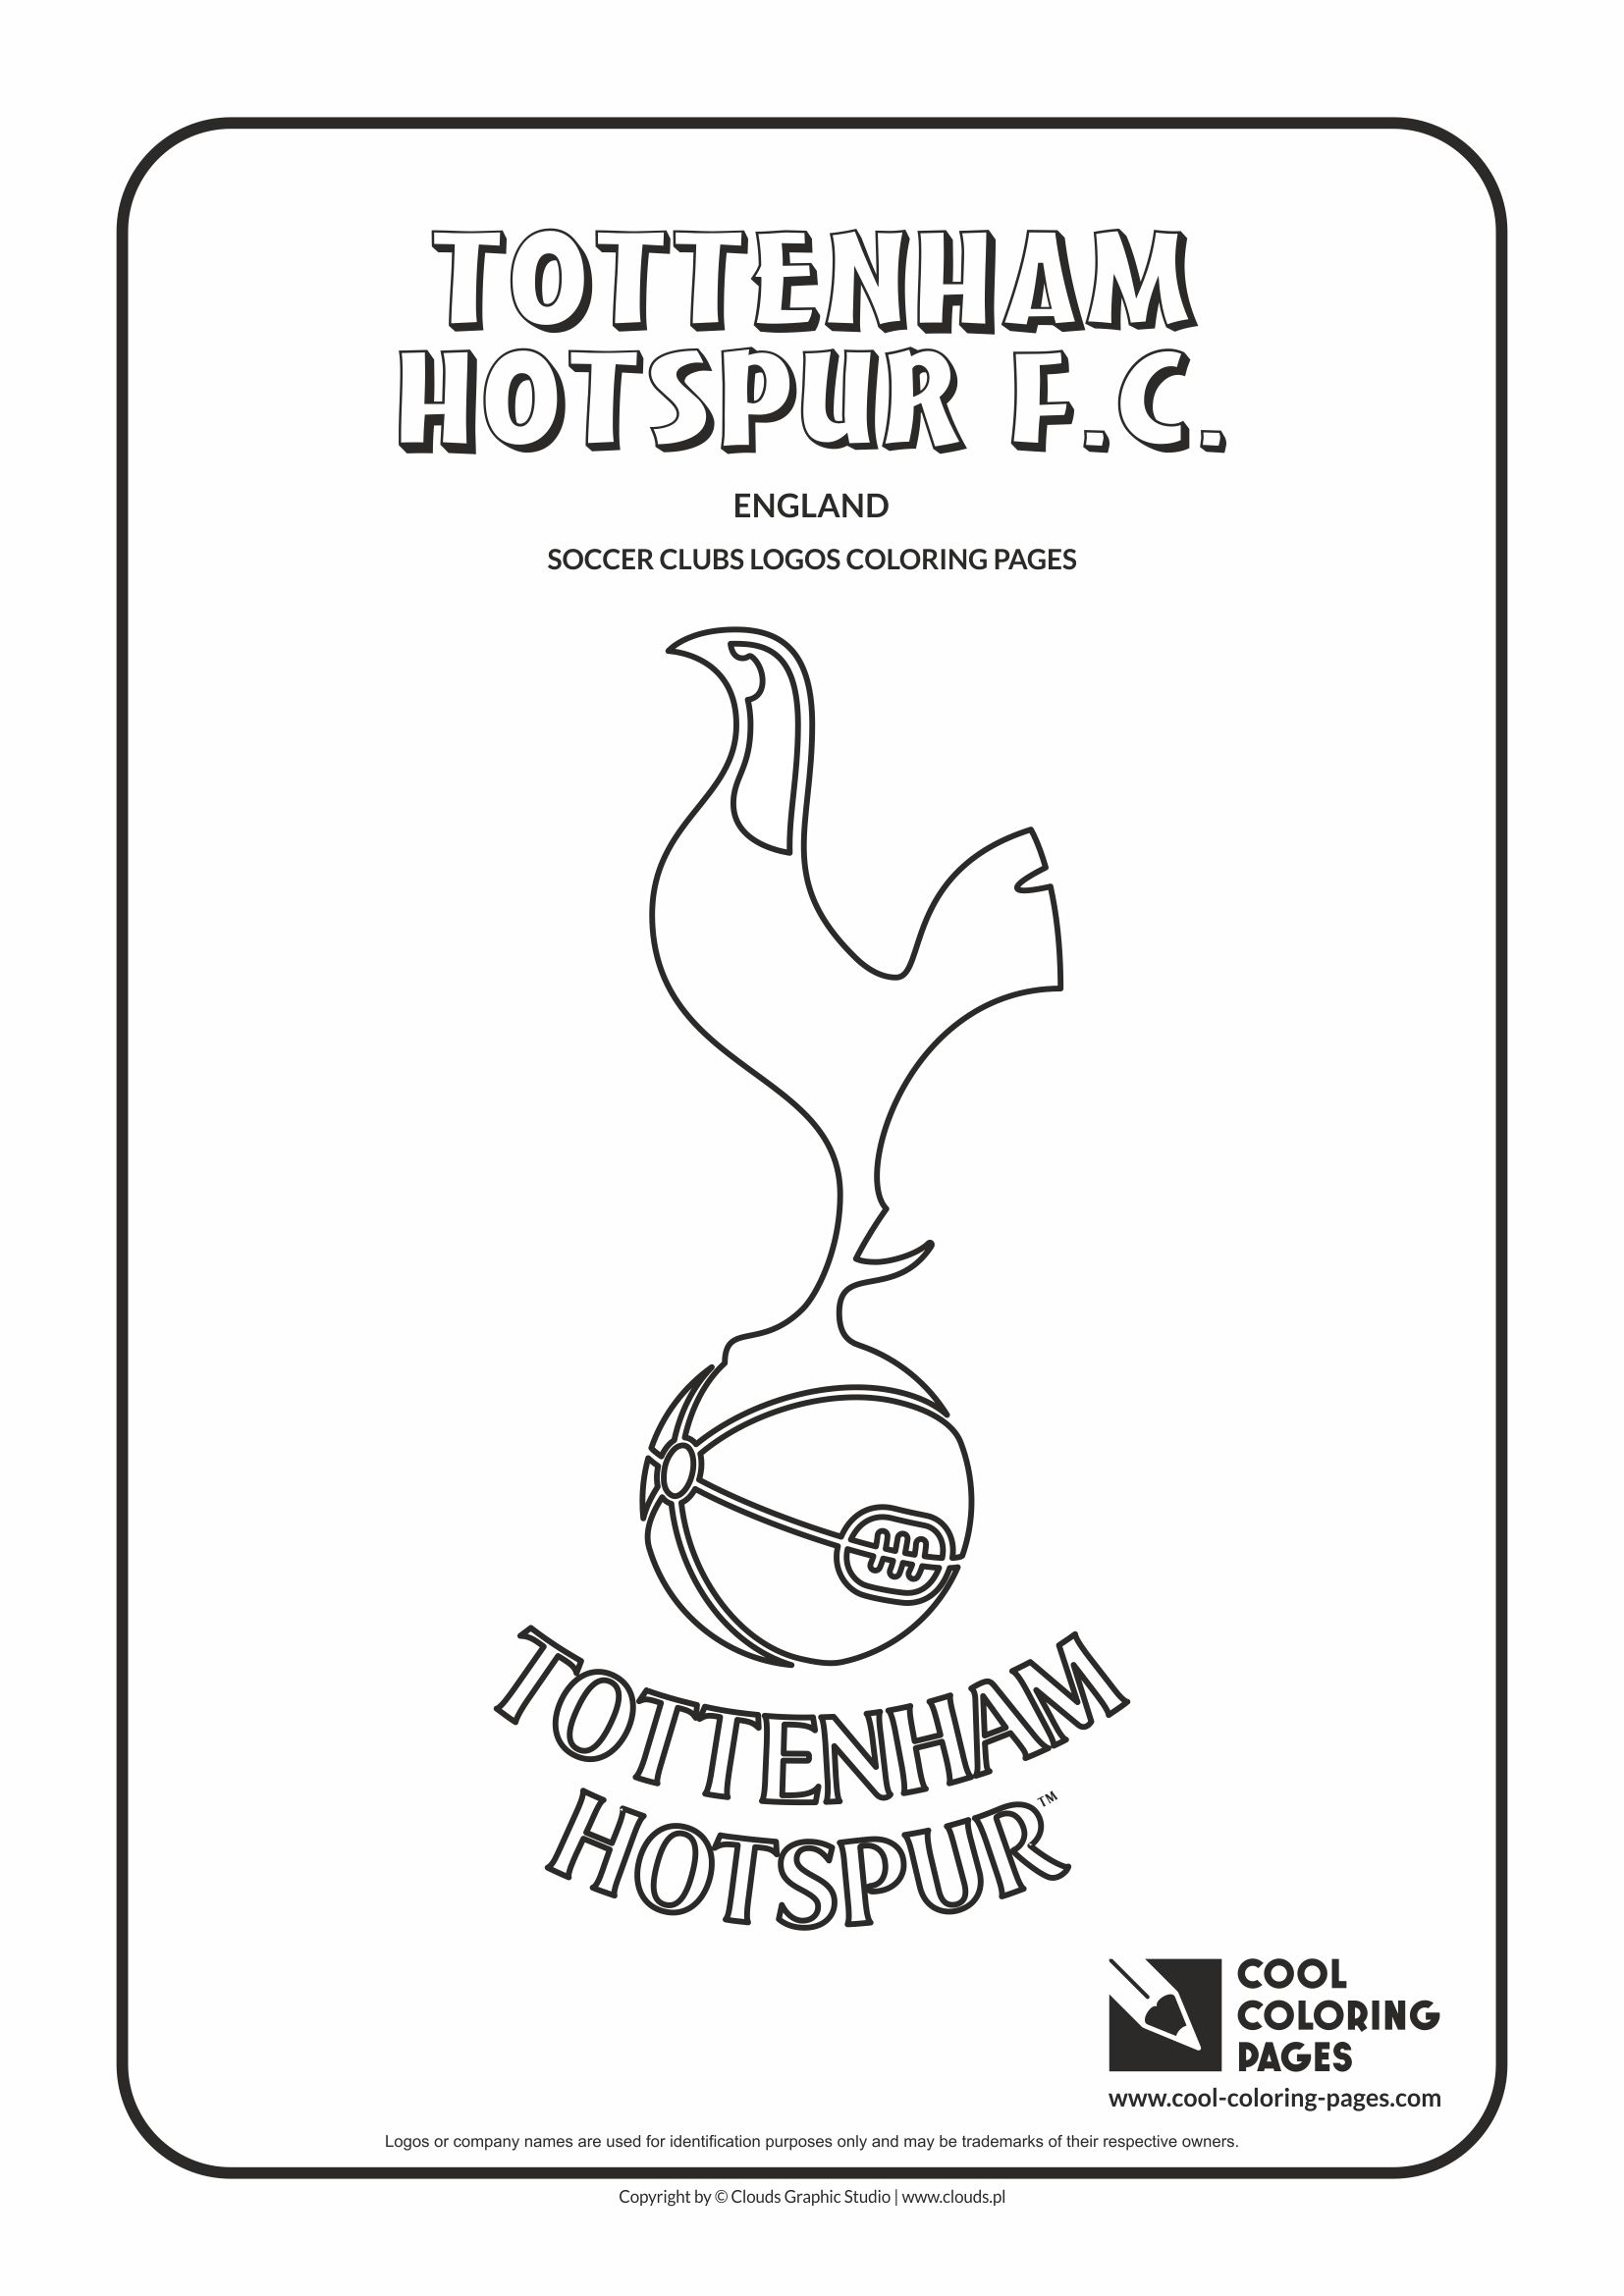 Cool Coloring Pages Tottenham Hotspur F.C. logo coloring page - Cool